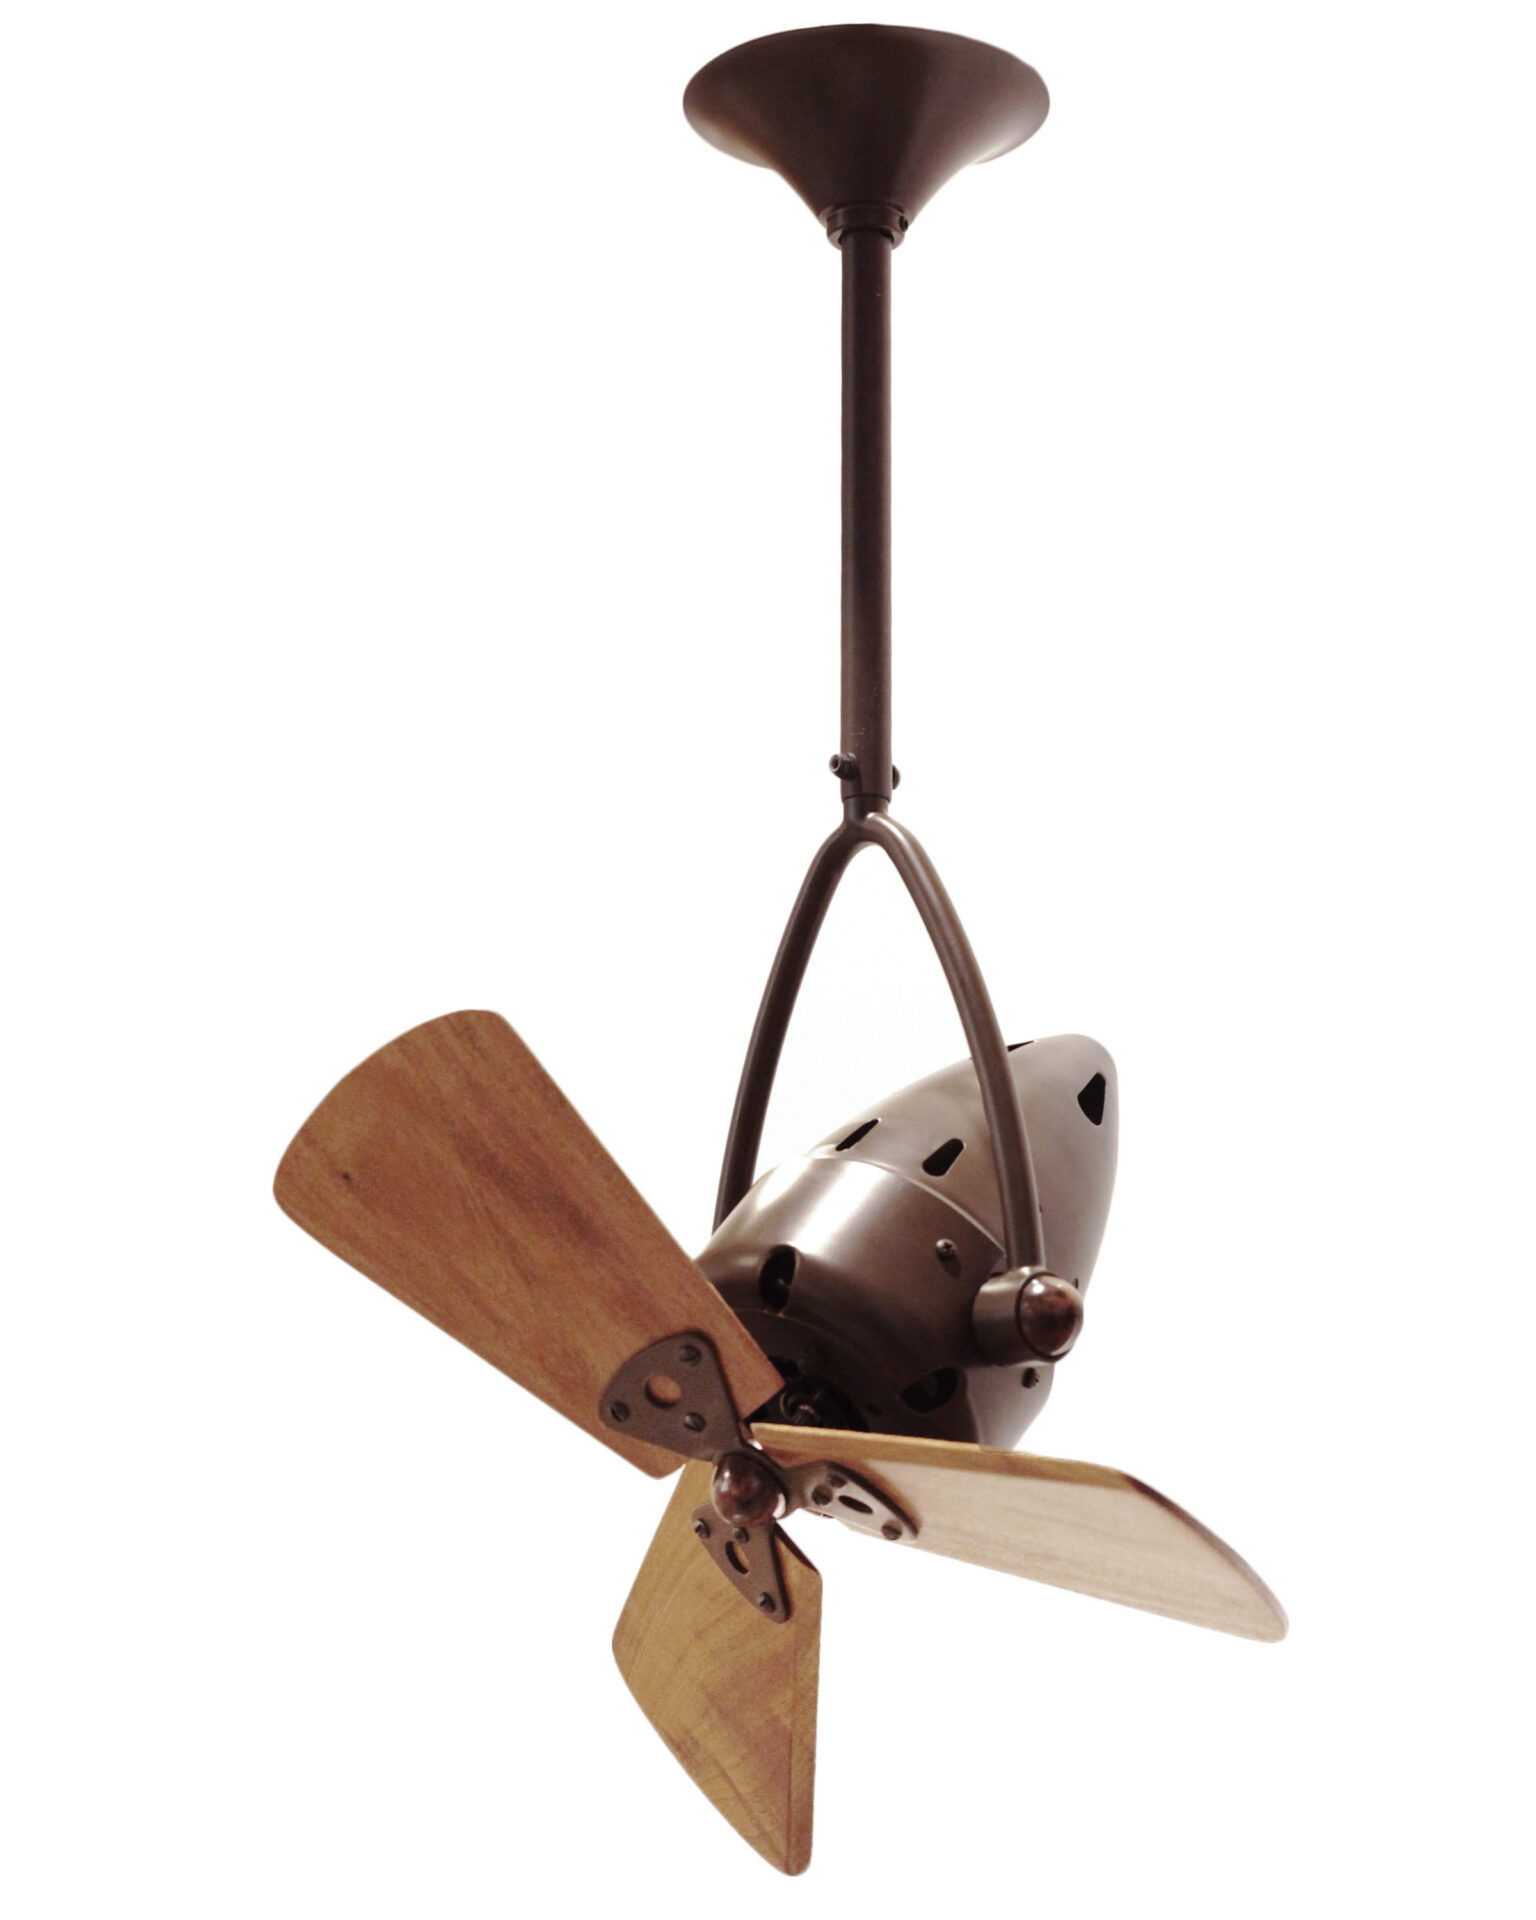 Jarold Direcional Ceiling Fan in Bronzette Finish with Mahogany Wood Blades